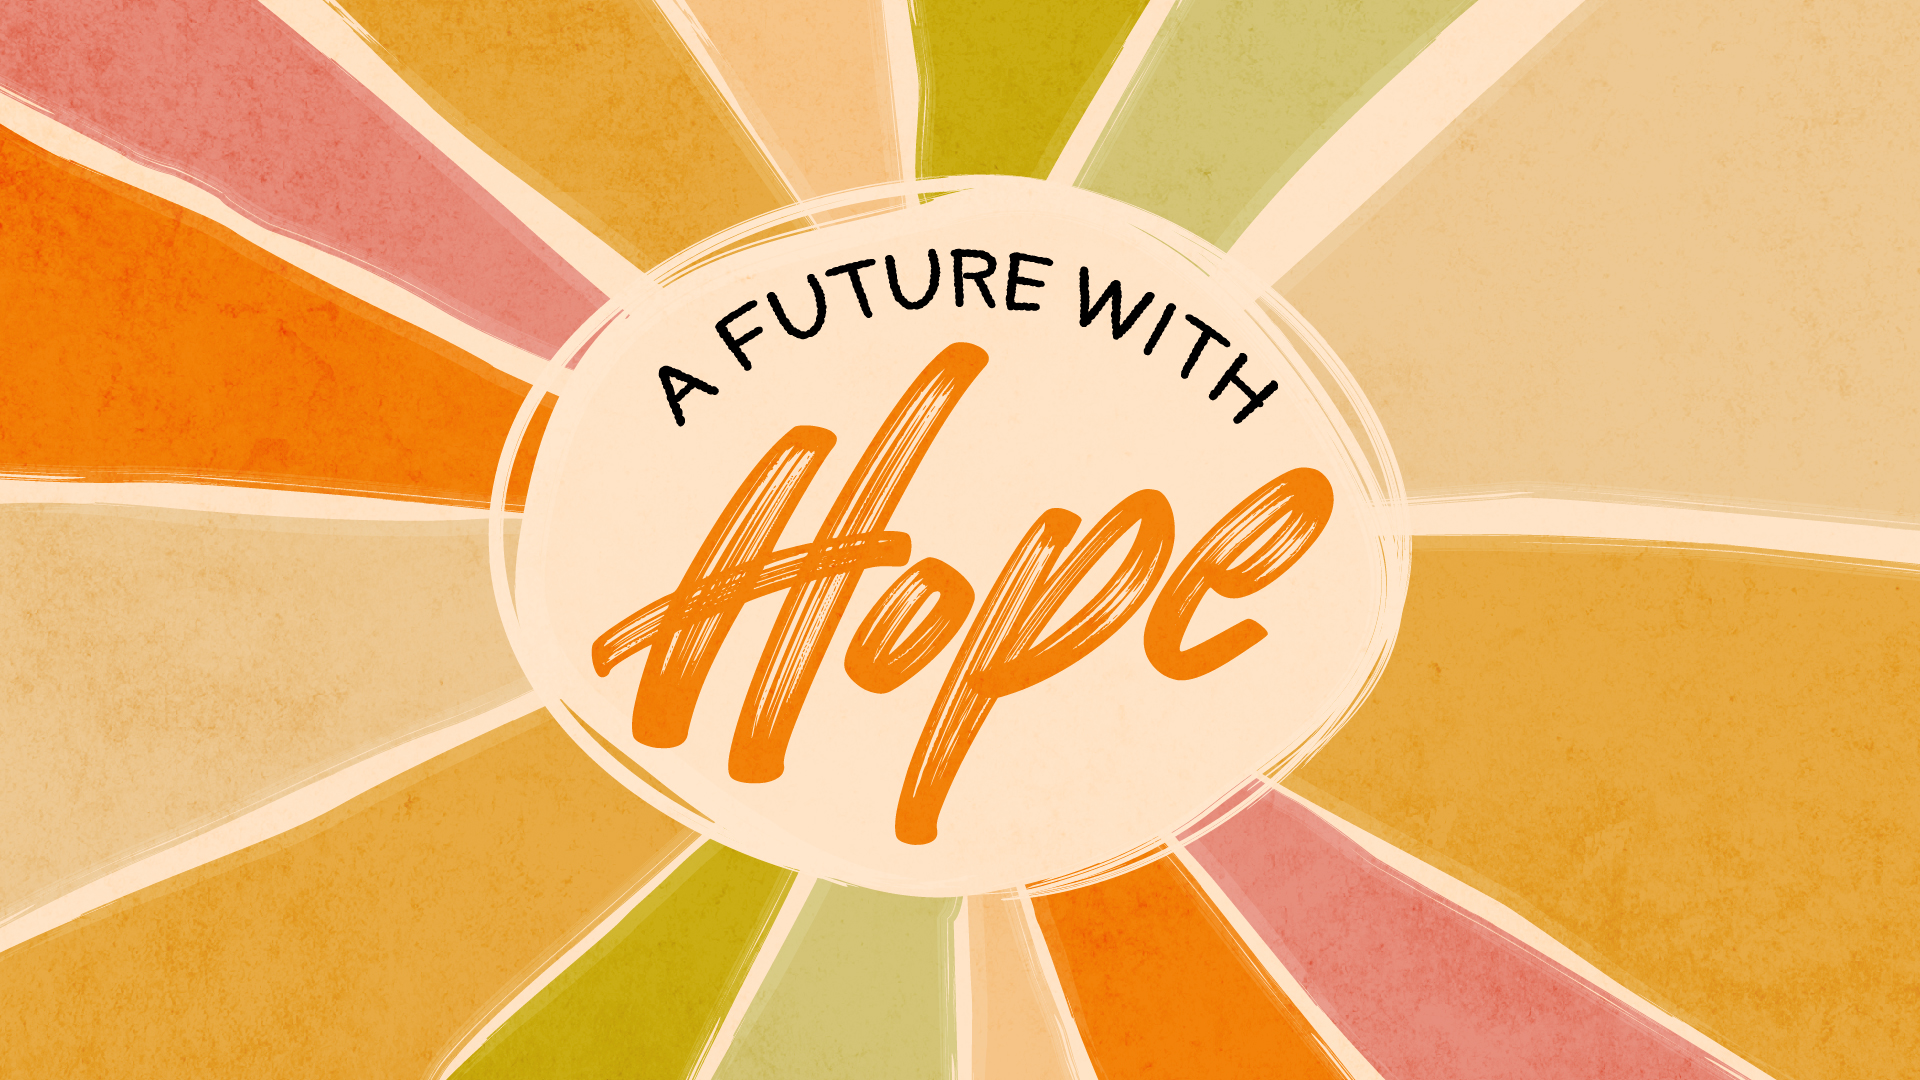 Cultivating A Future With Hope